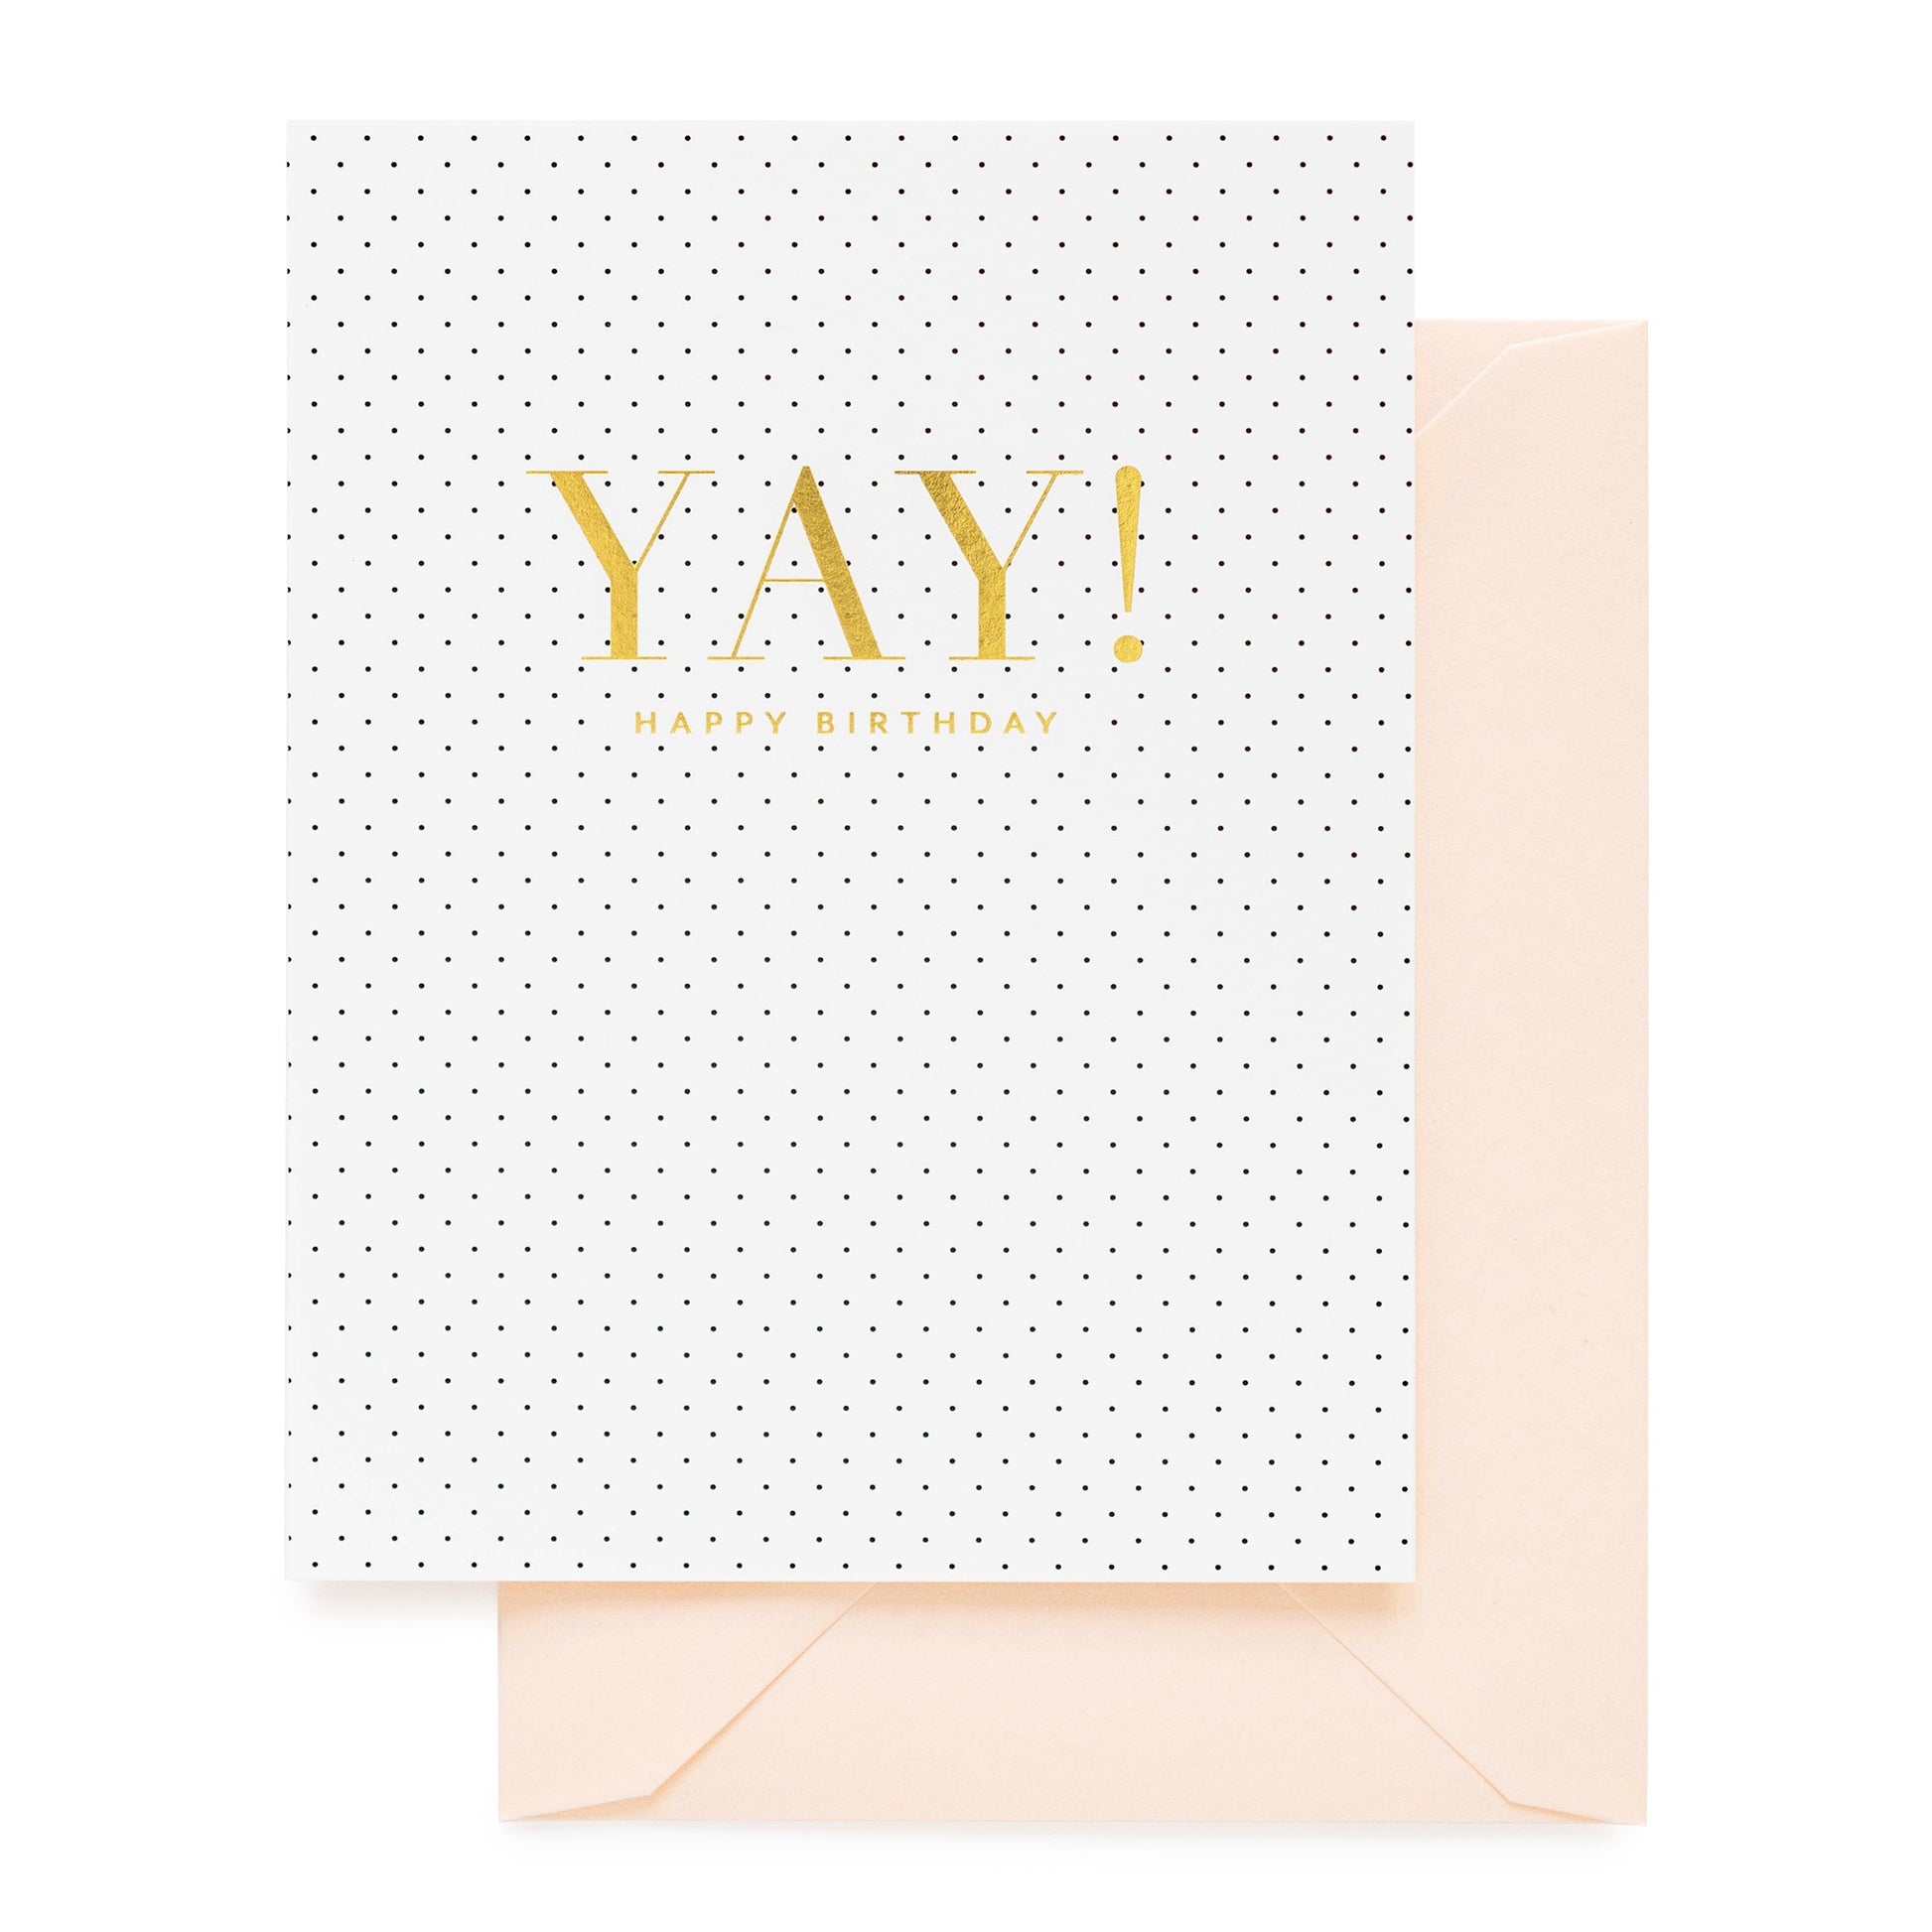 White and black dot birthday card with foil printed YAY and a pink envelope